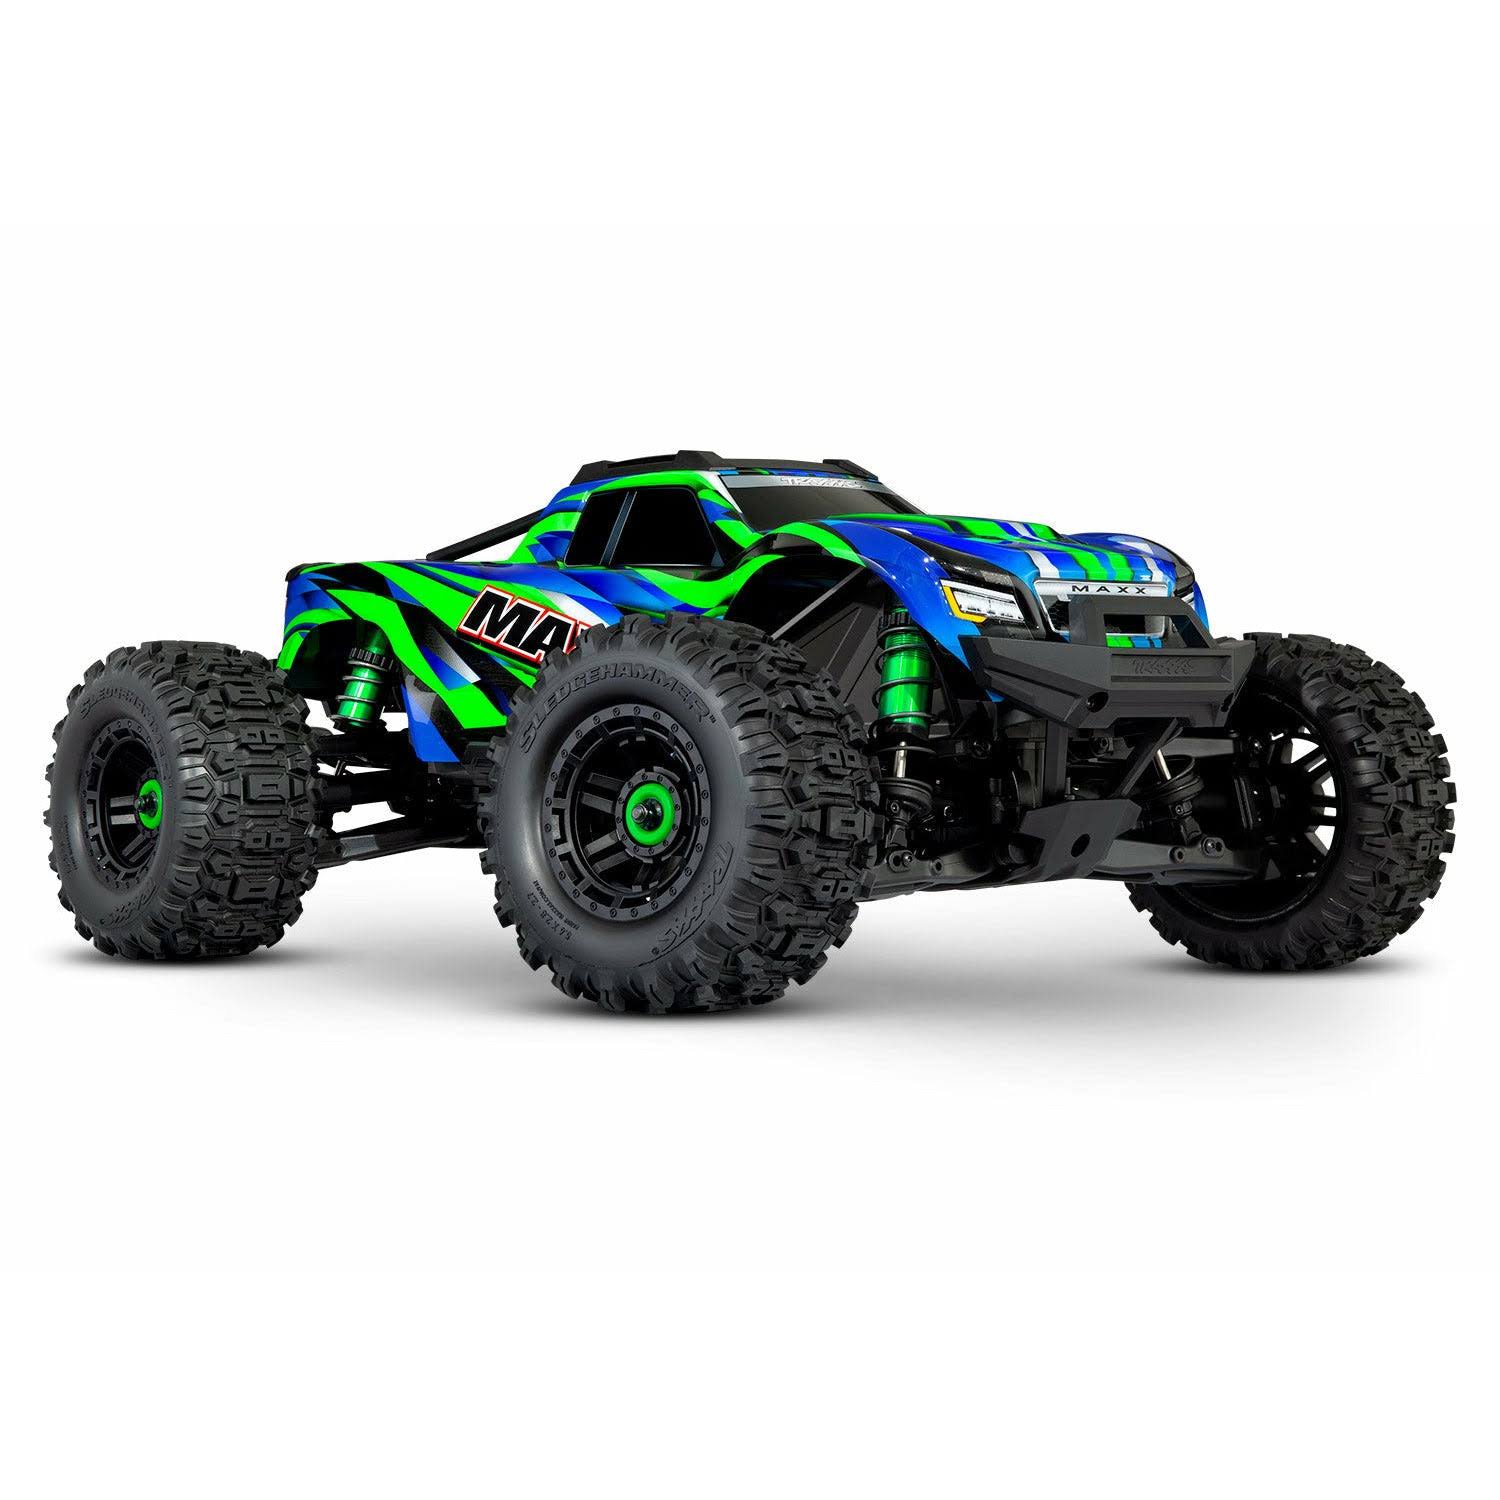 Traxxas 89086-4 Maxx V2 with WideMaxx 1/10 Electric RC Monster Truck Green